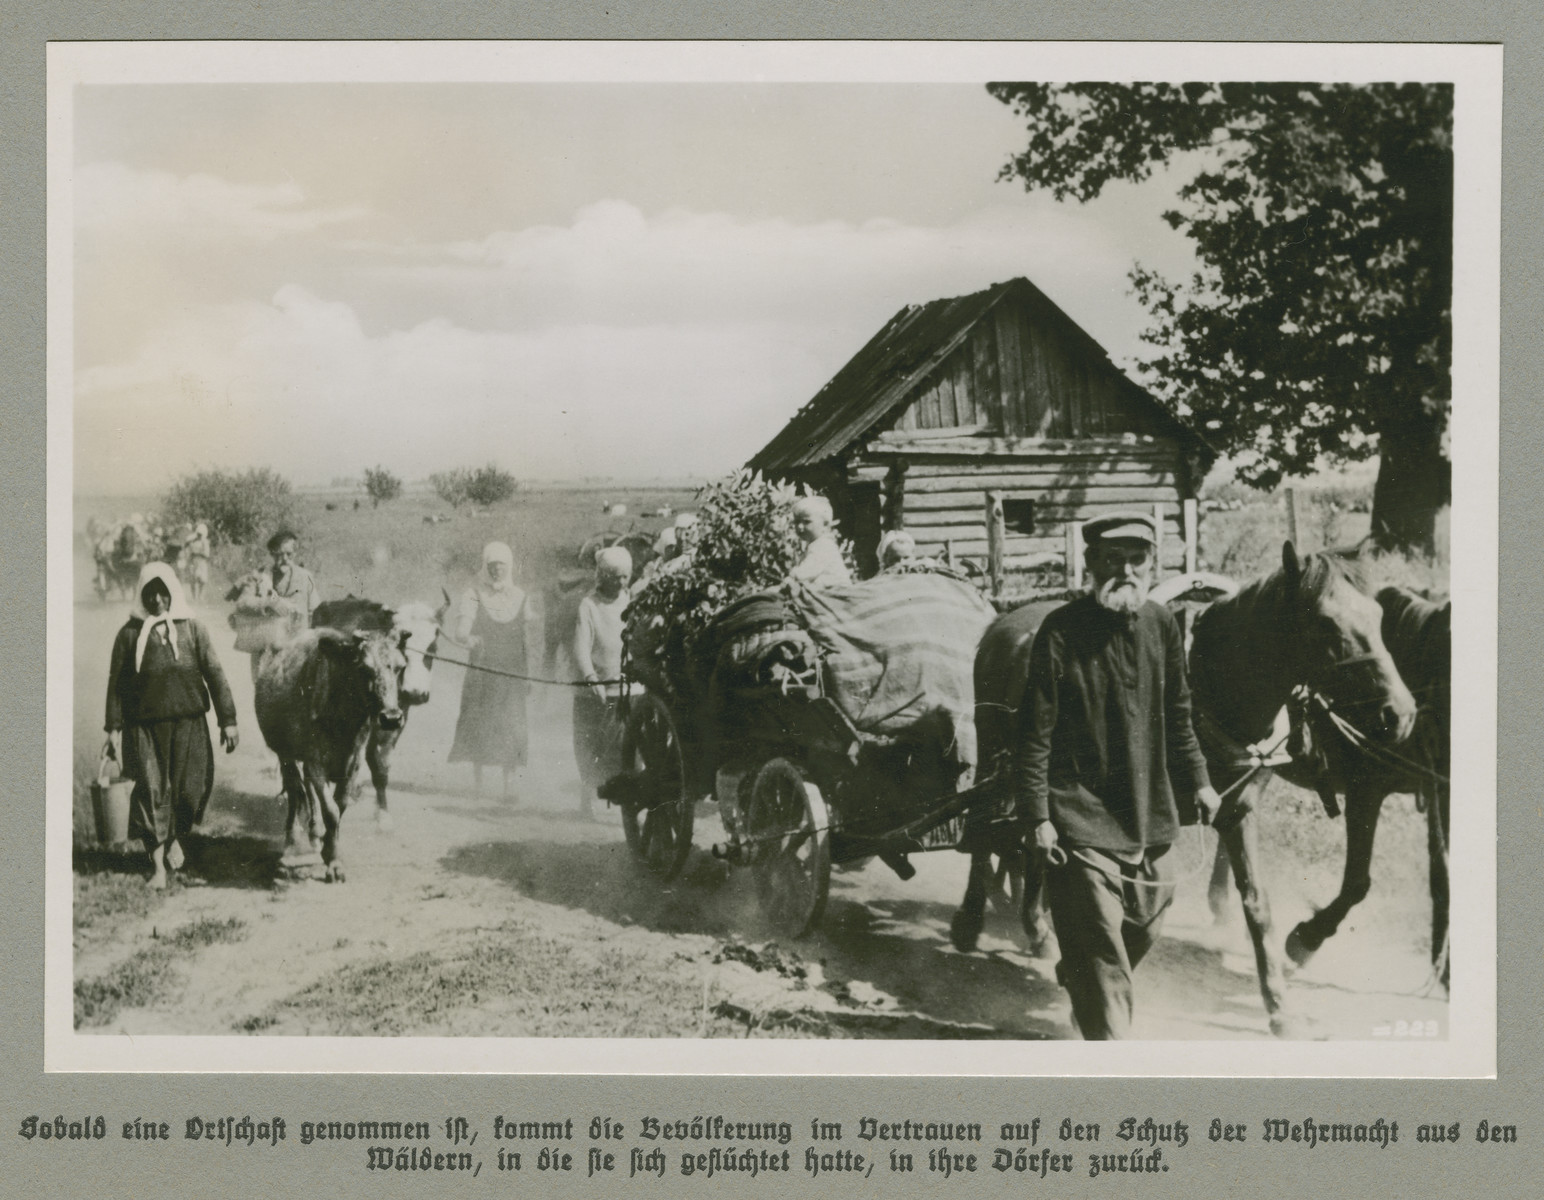 Peasants with wagons and livestock proceed down a dirt road.

The original caption reads: As soon as an area has been taken, the entire population returns to their villages from the forests to which they have fled, confident in the protection of the Wehrmacht.